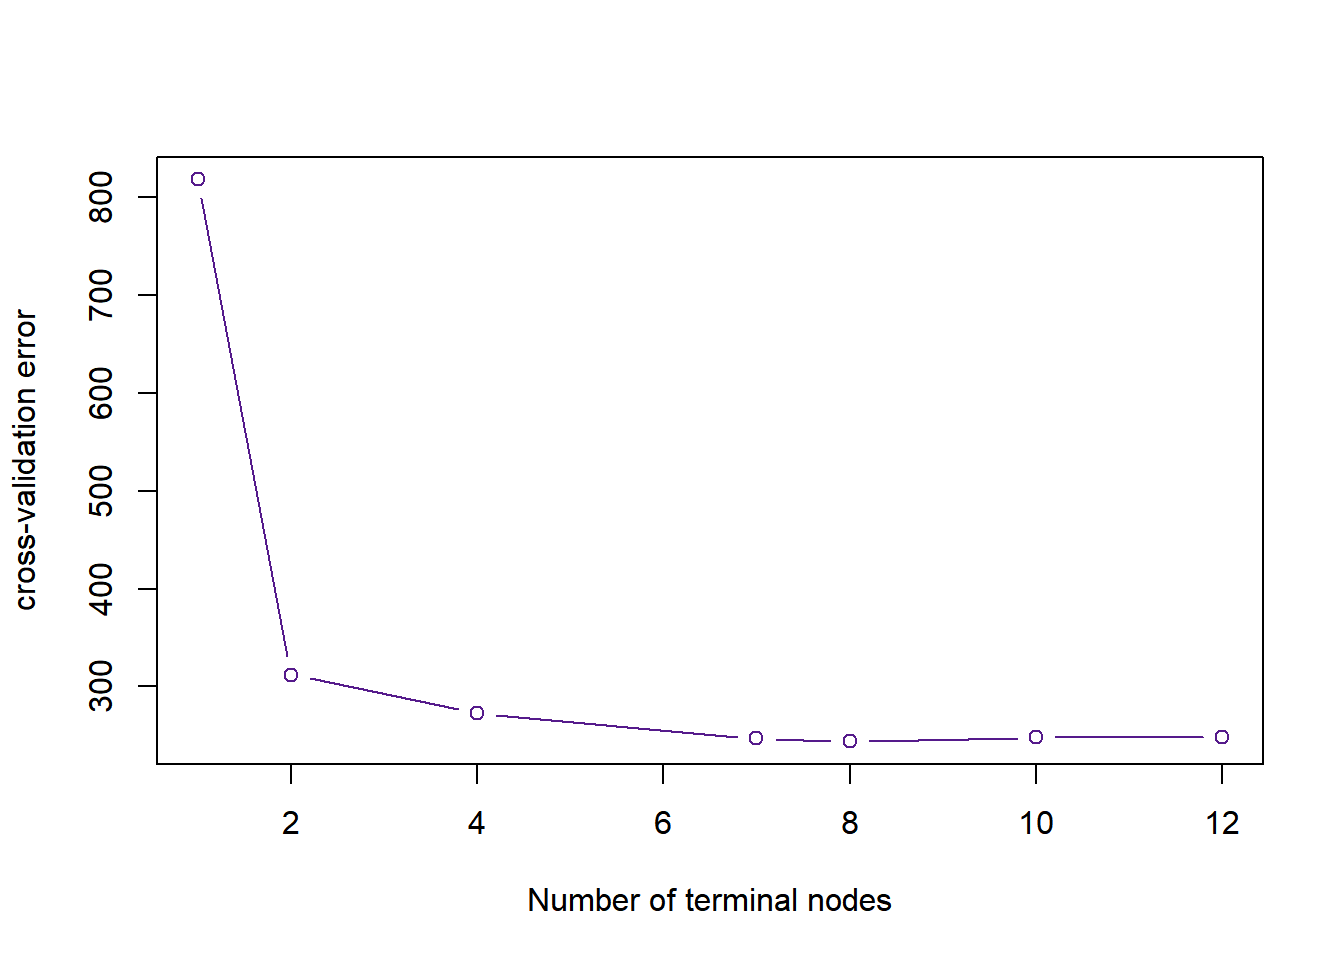 The cross-validation error rate across the number of terminal nodes